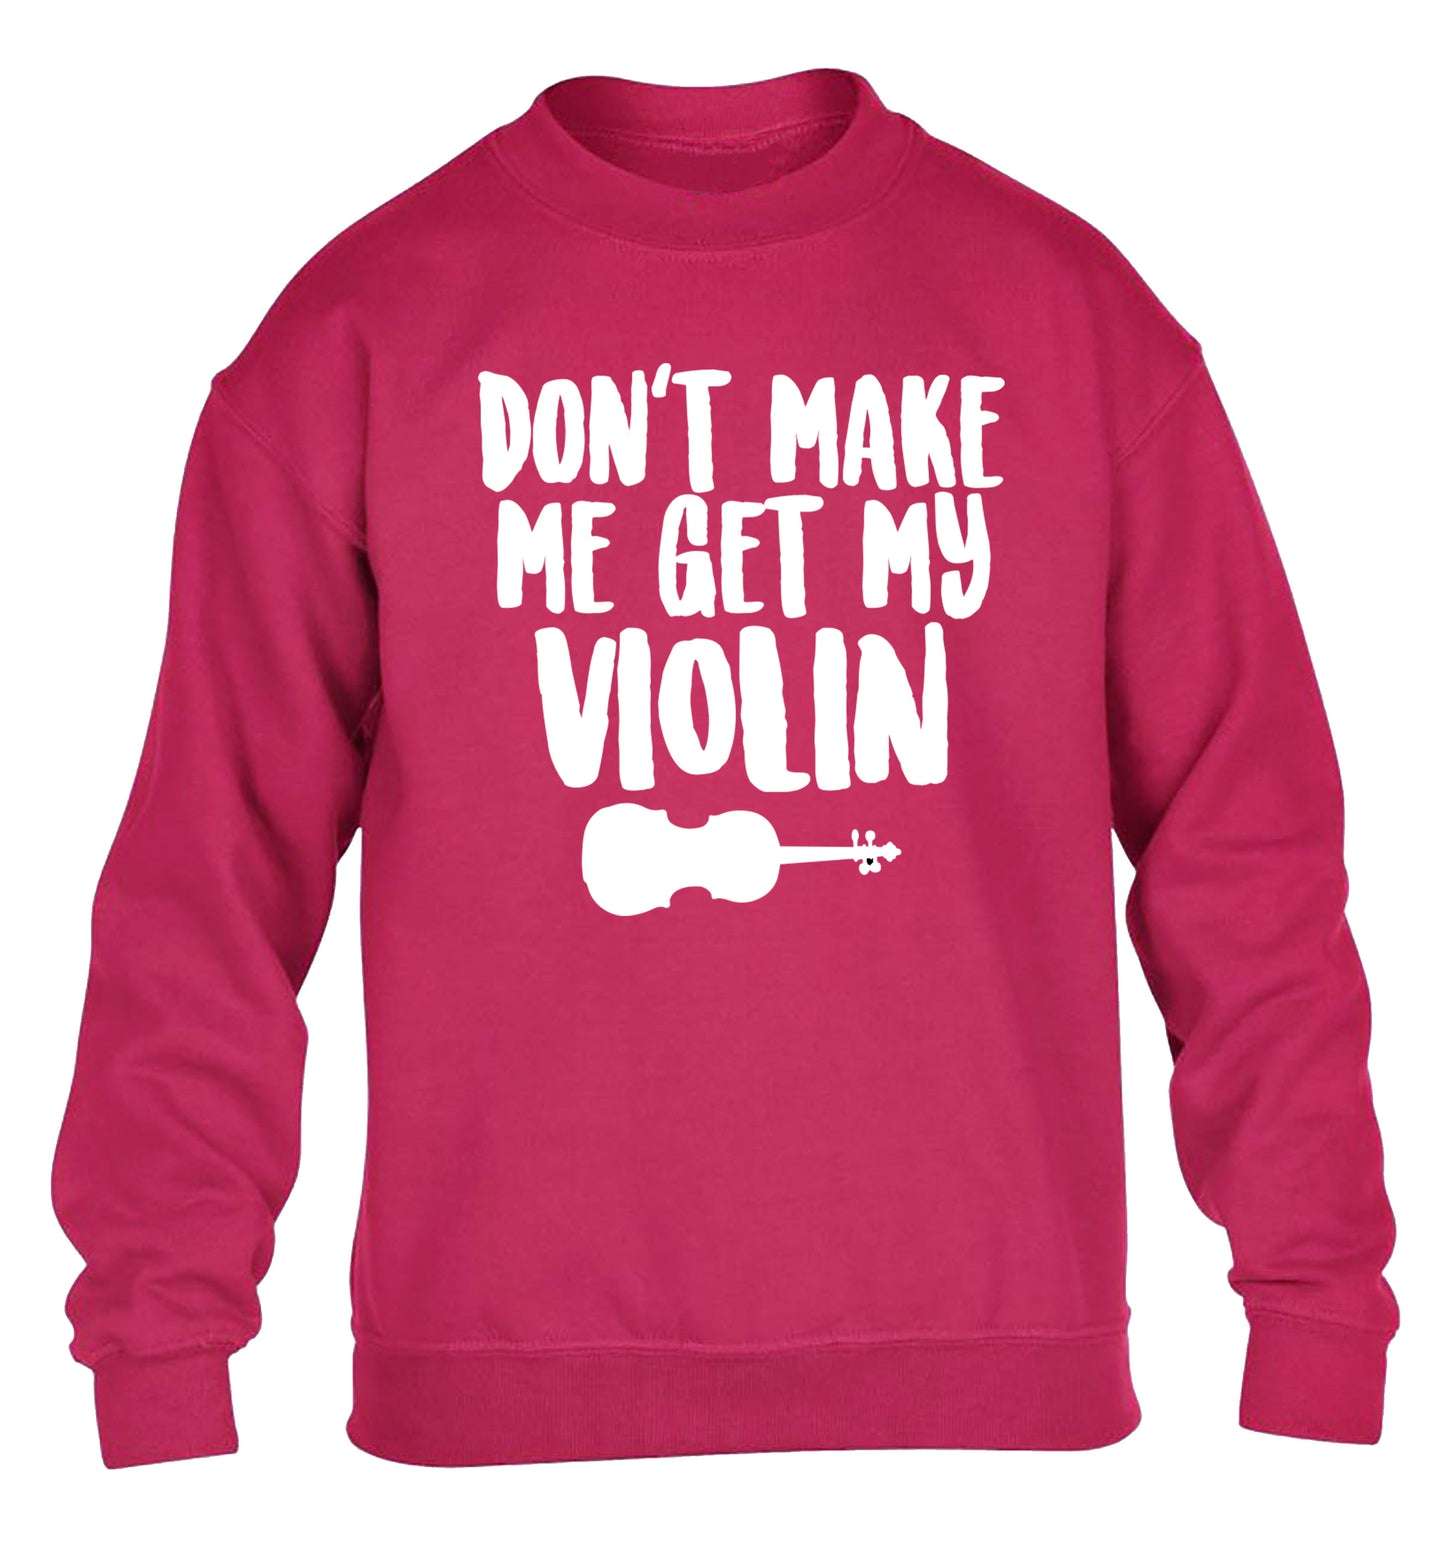 Don't make me get my violin children's pink sweater 12-13 Years